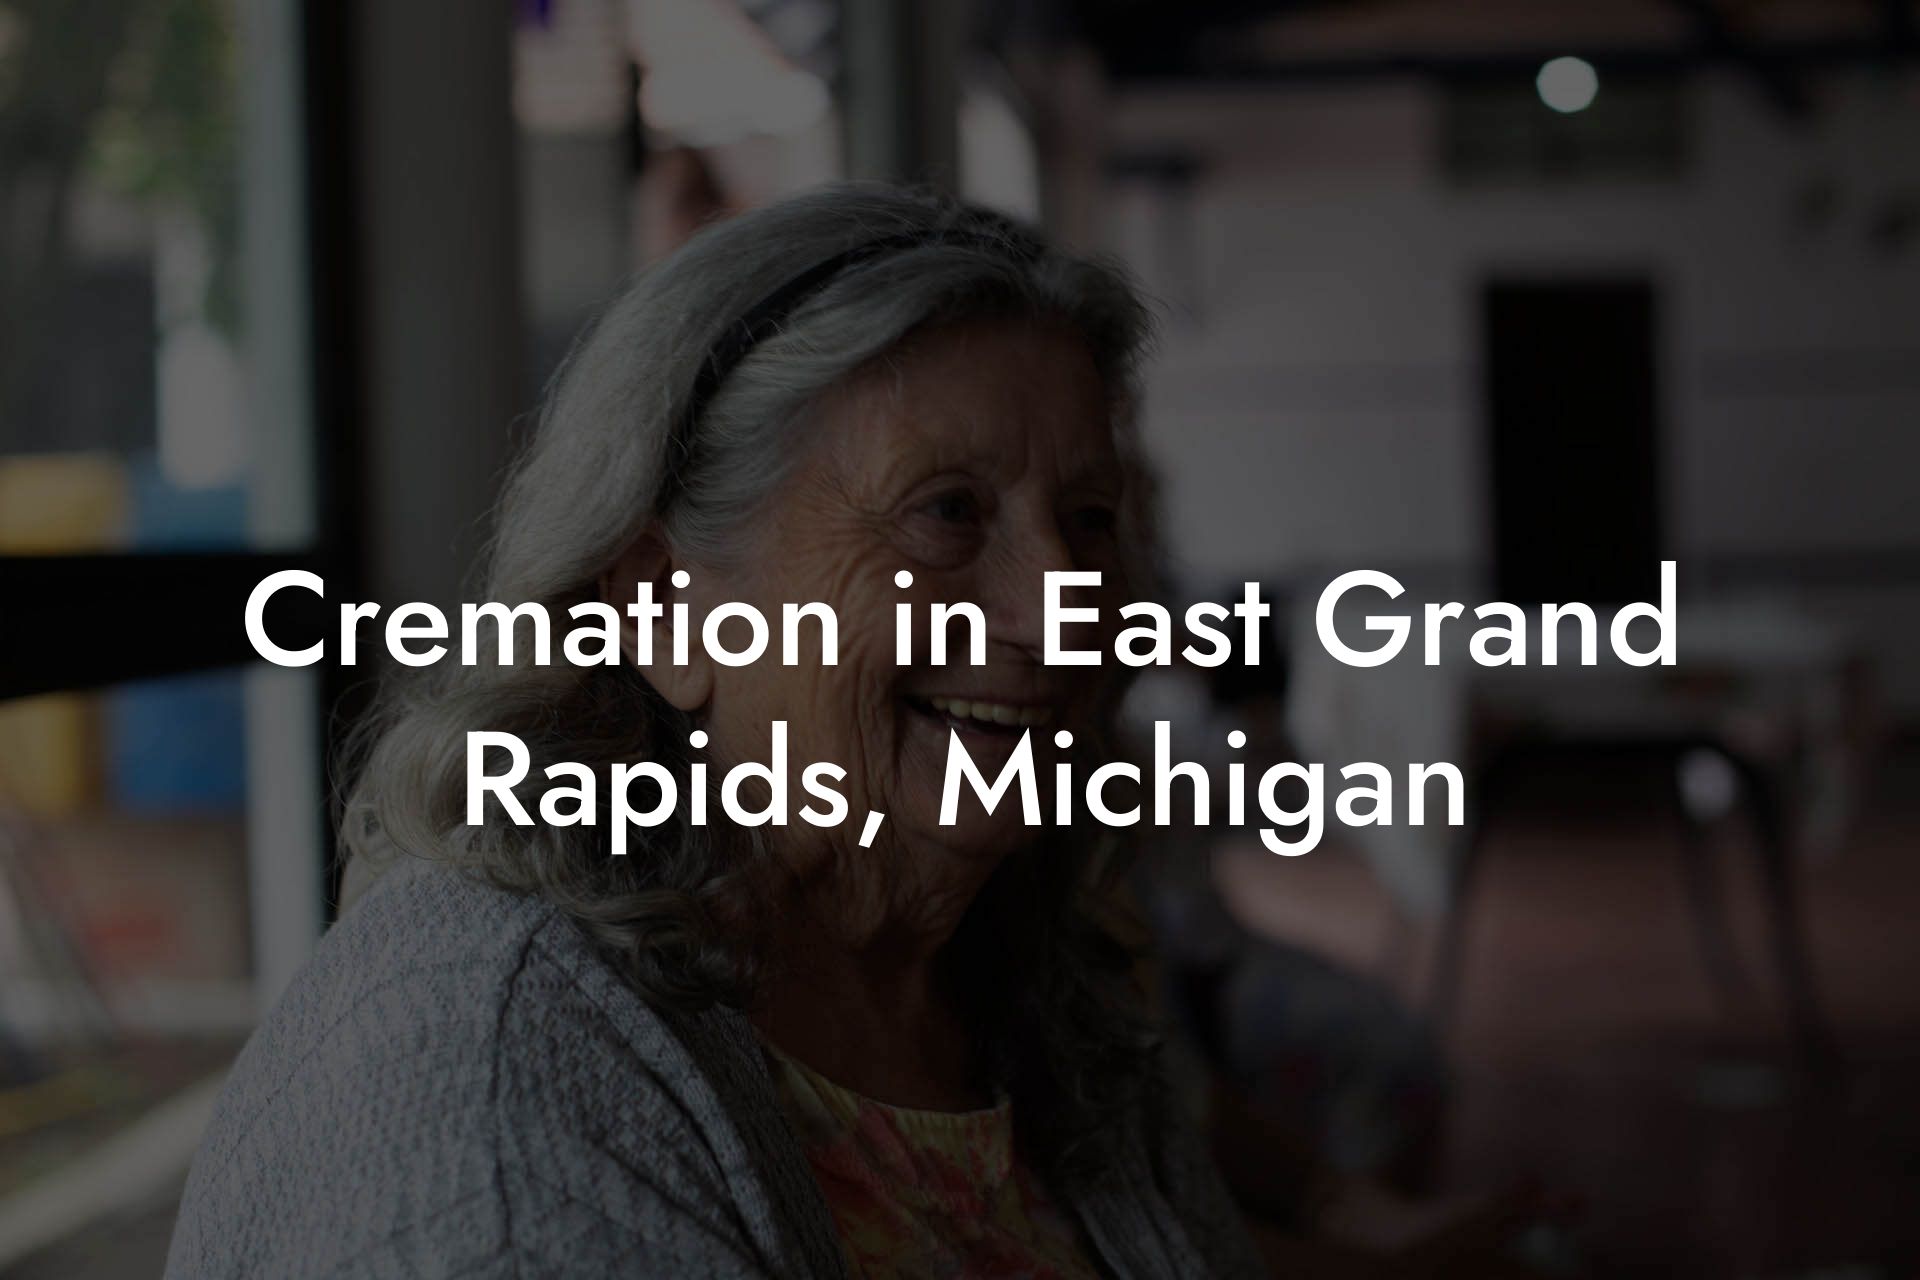 Cremation in East Grand Rapids, Michigan